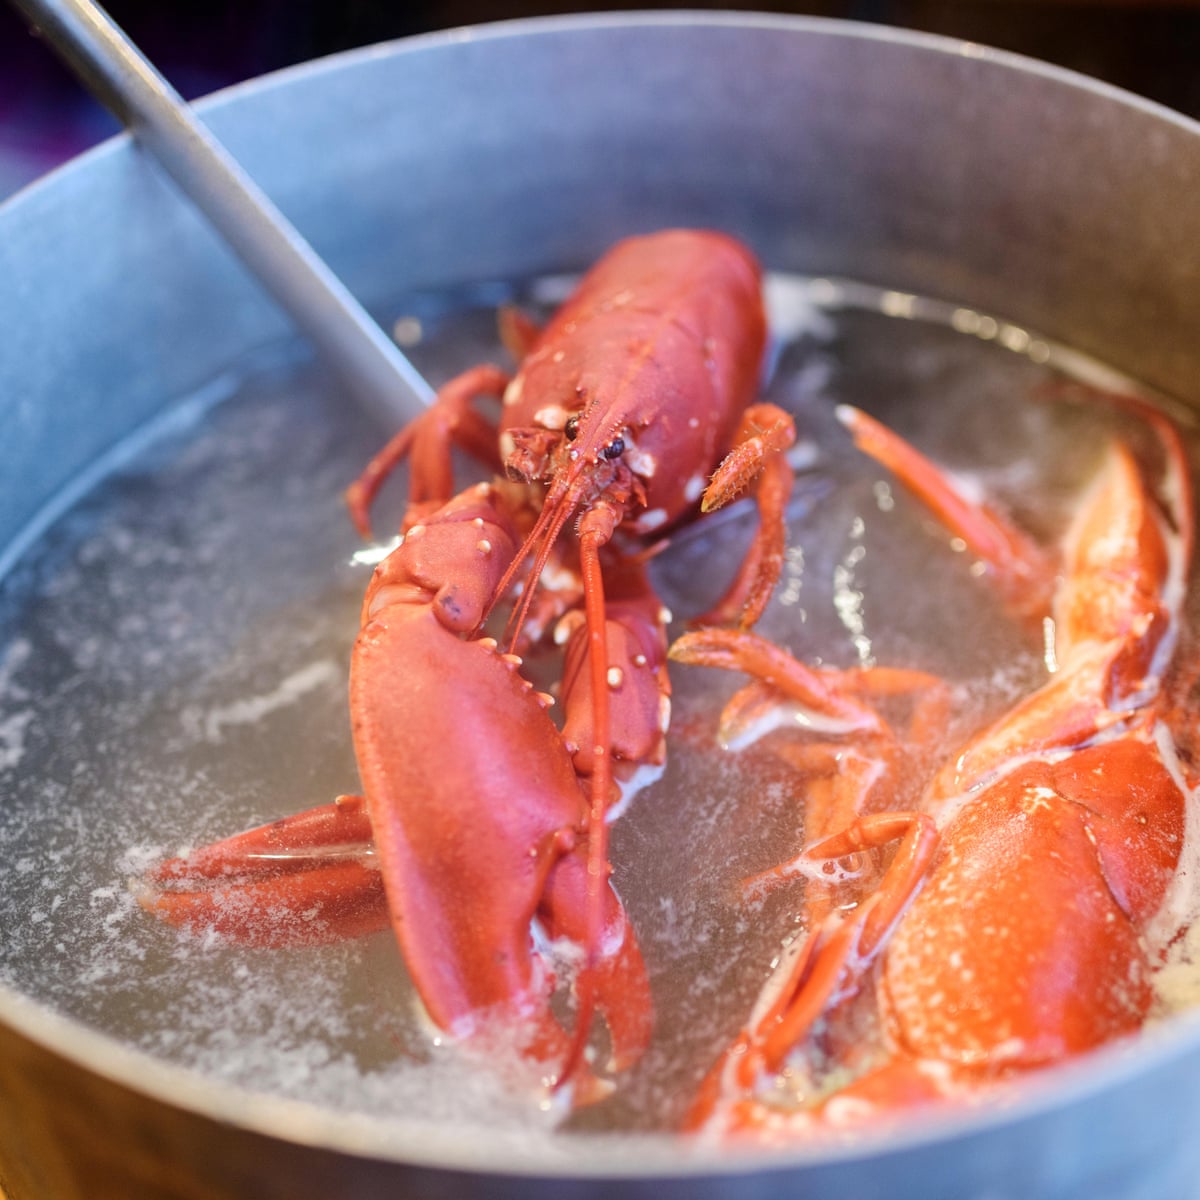 Is it wrong to boil lobsters alive? | Animal welfare | The Guardian